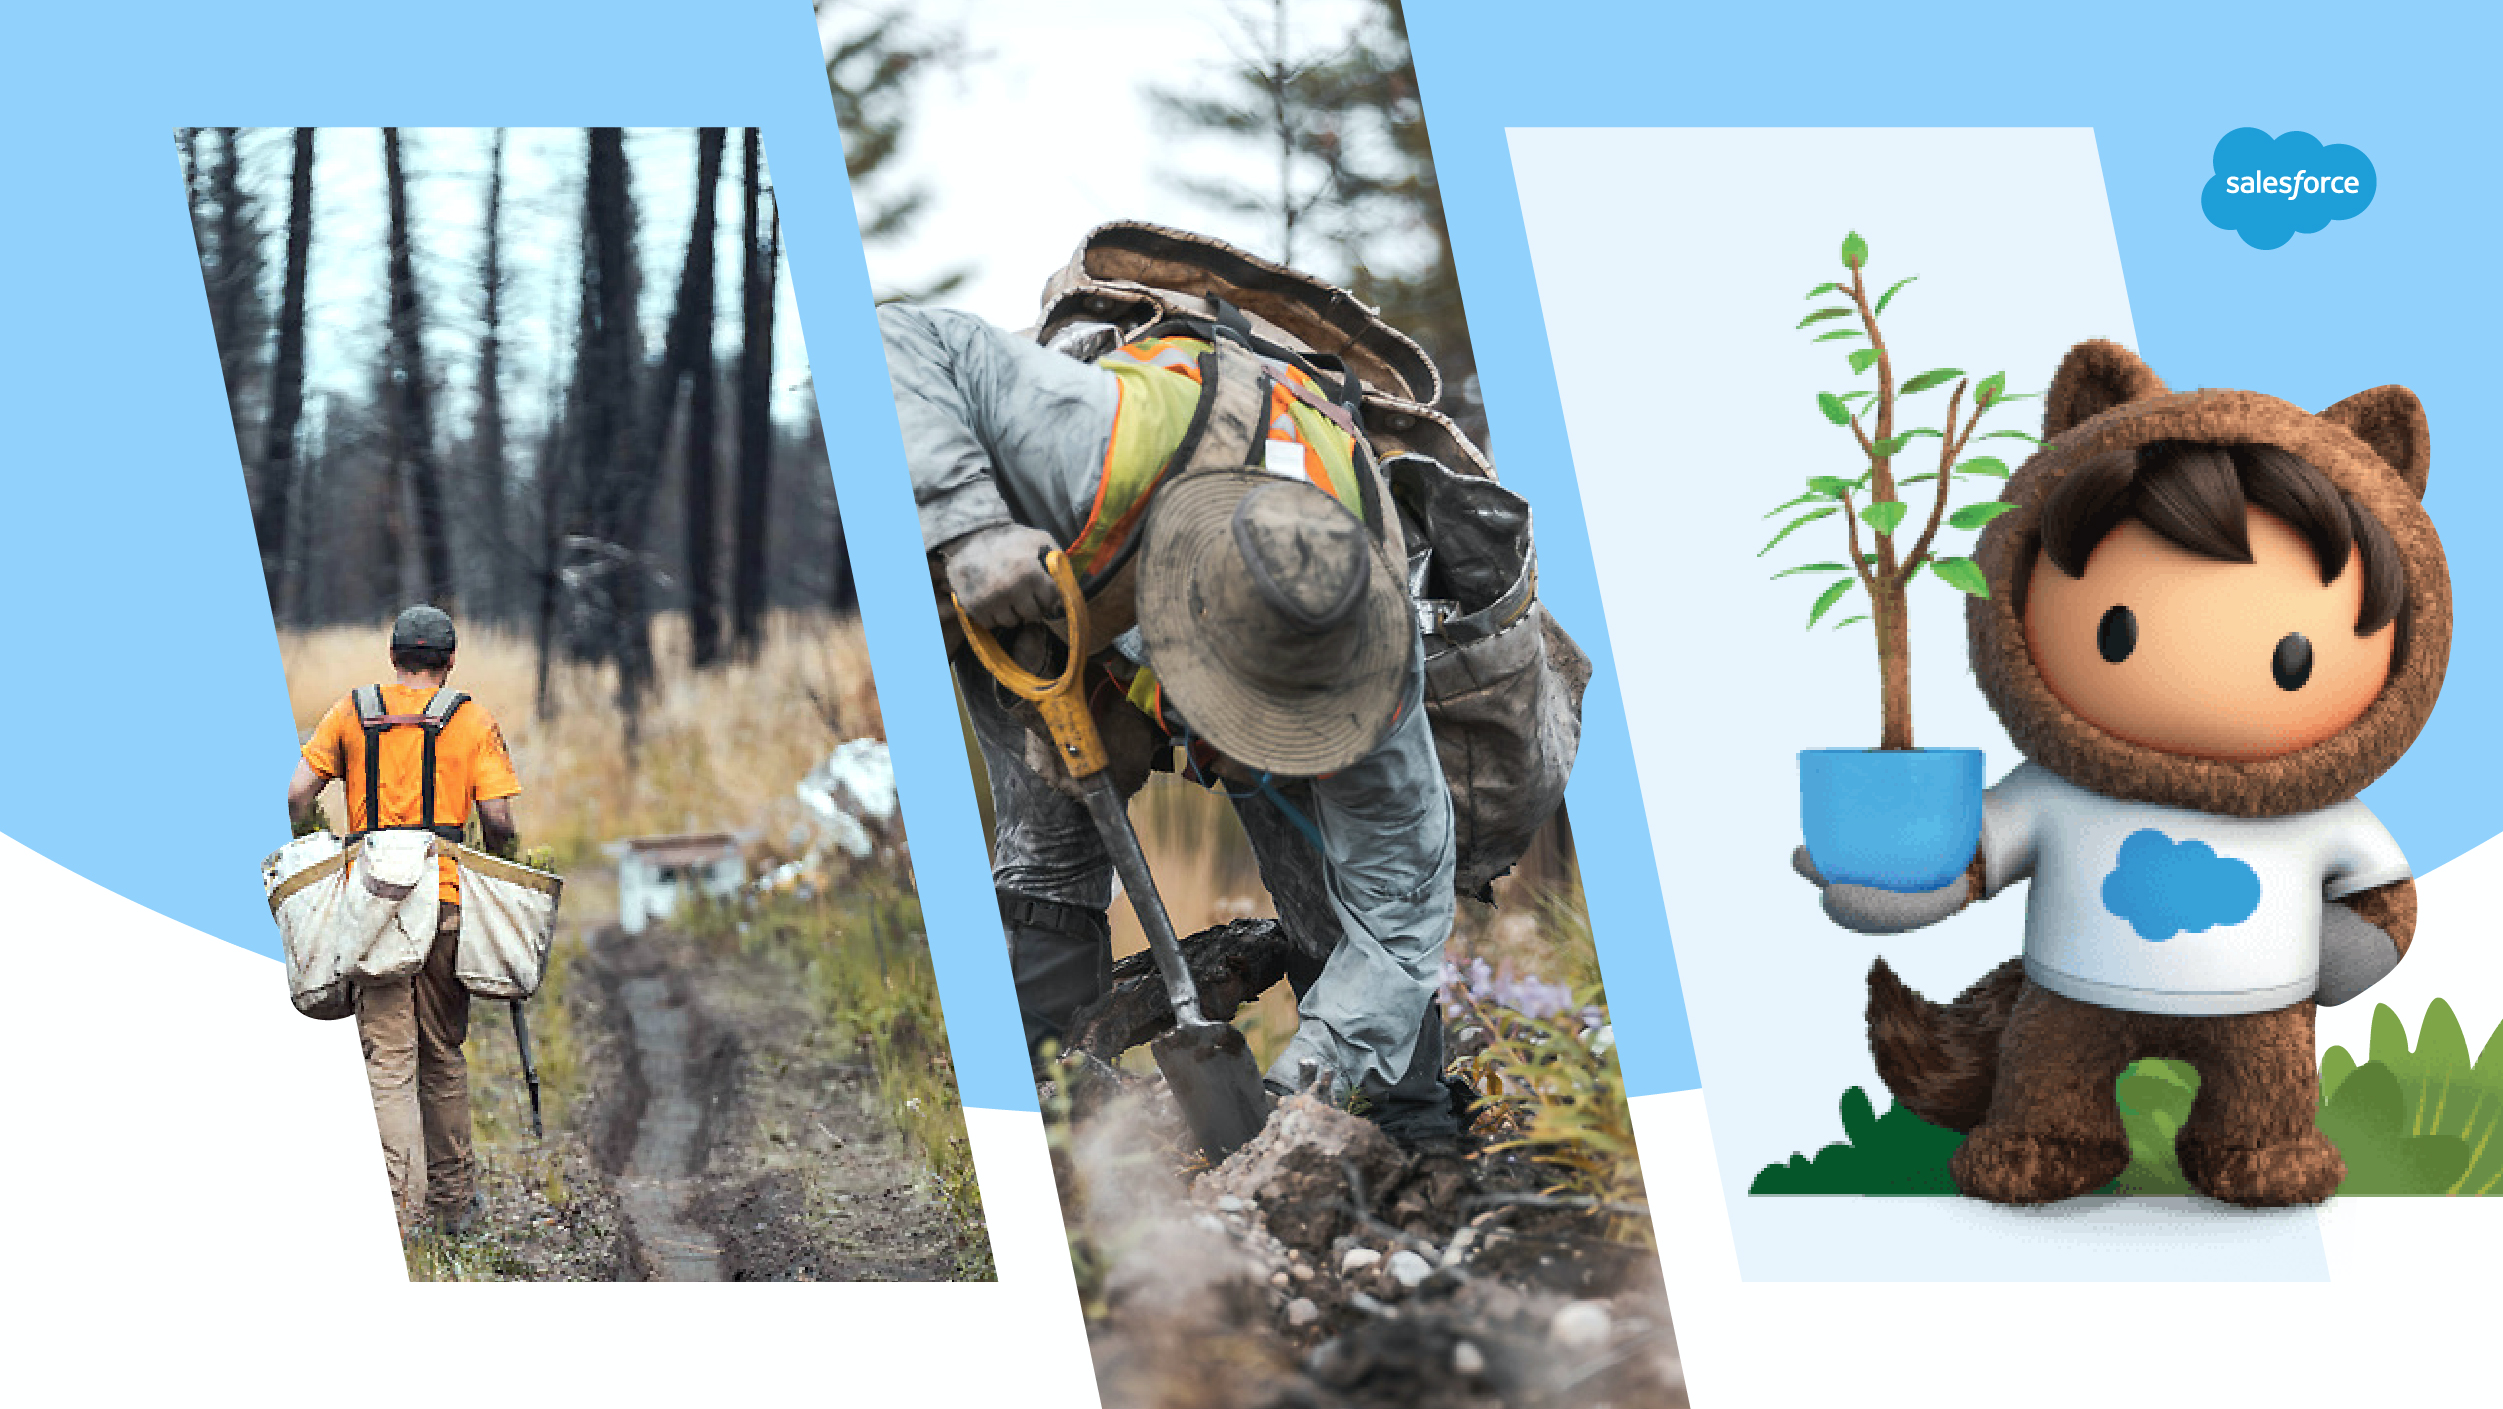 How Businesses Can Build Upon Salesforce Canada’s Reforestation Efforts With One Tree Planted